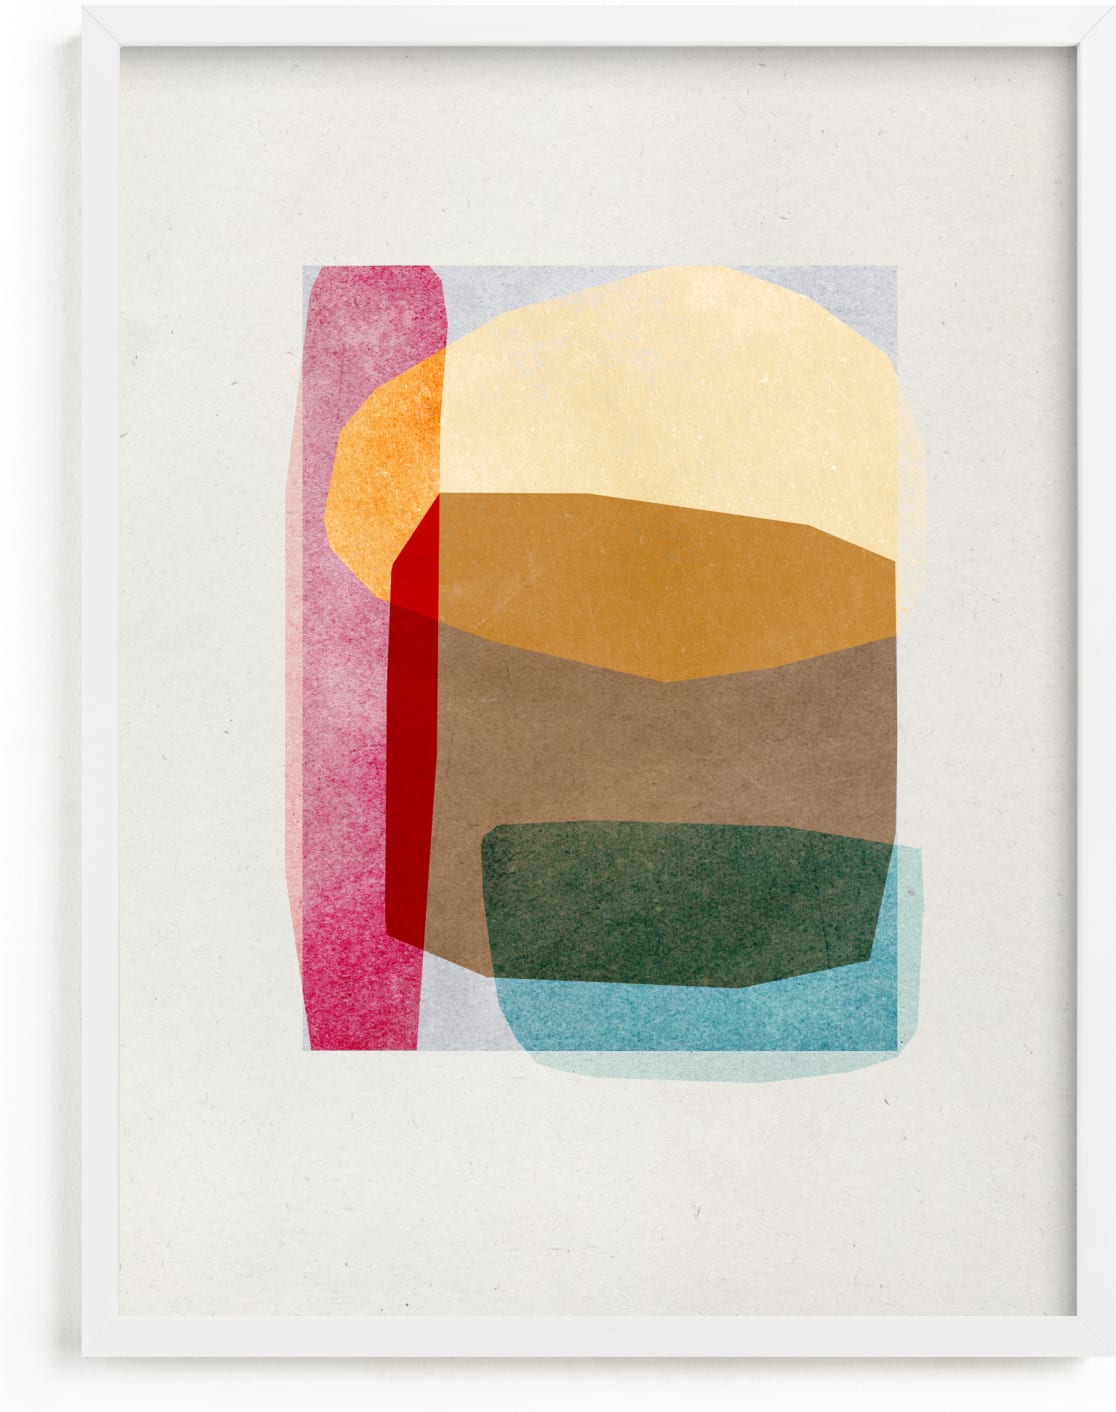 This is a colorful art by Sumak Studio called sheer shapes.